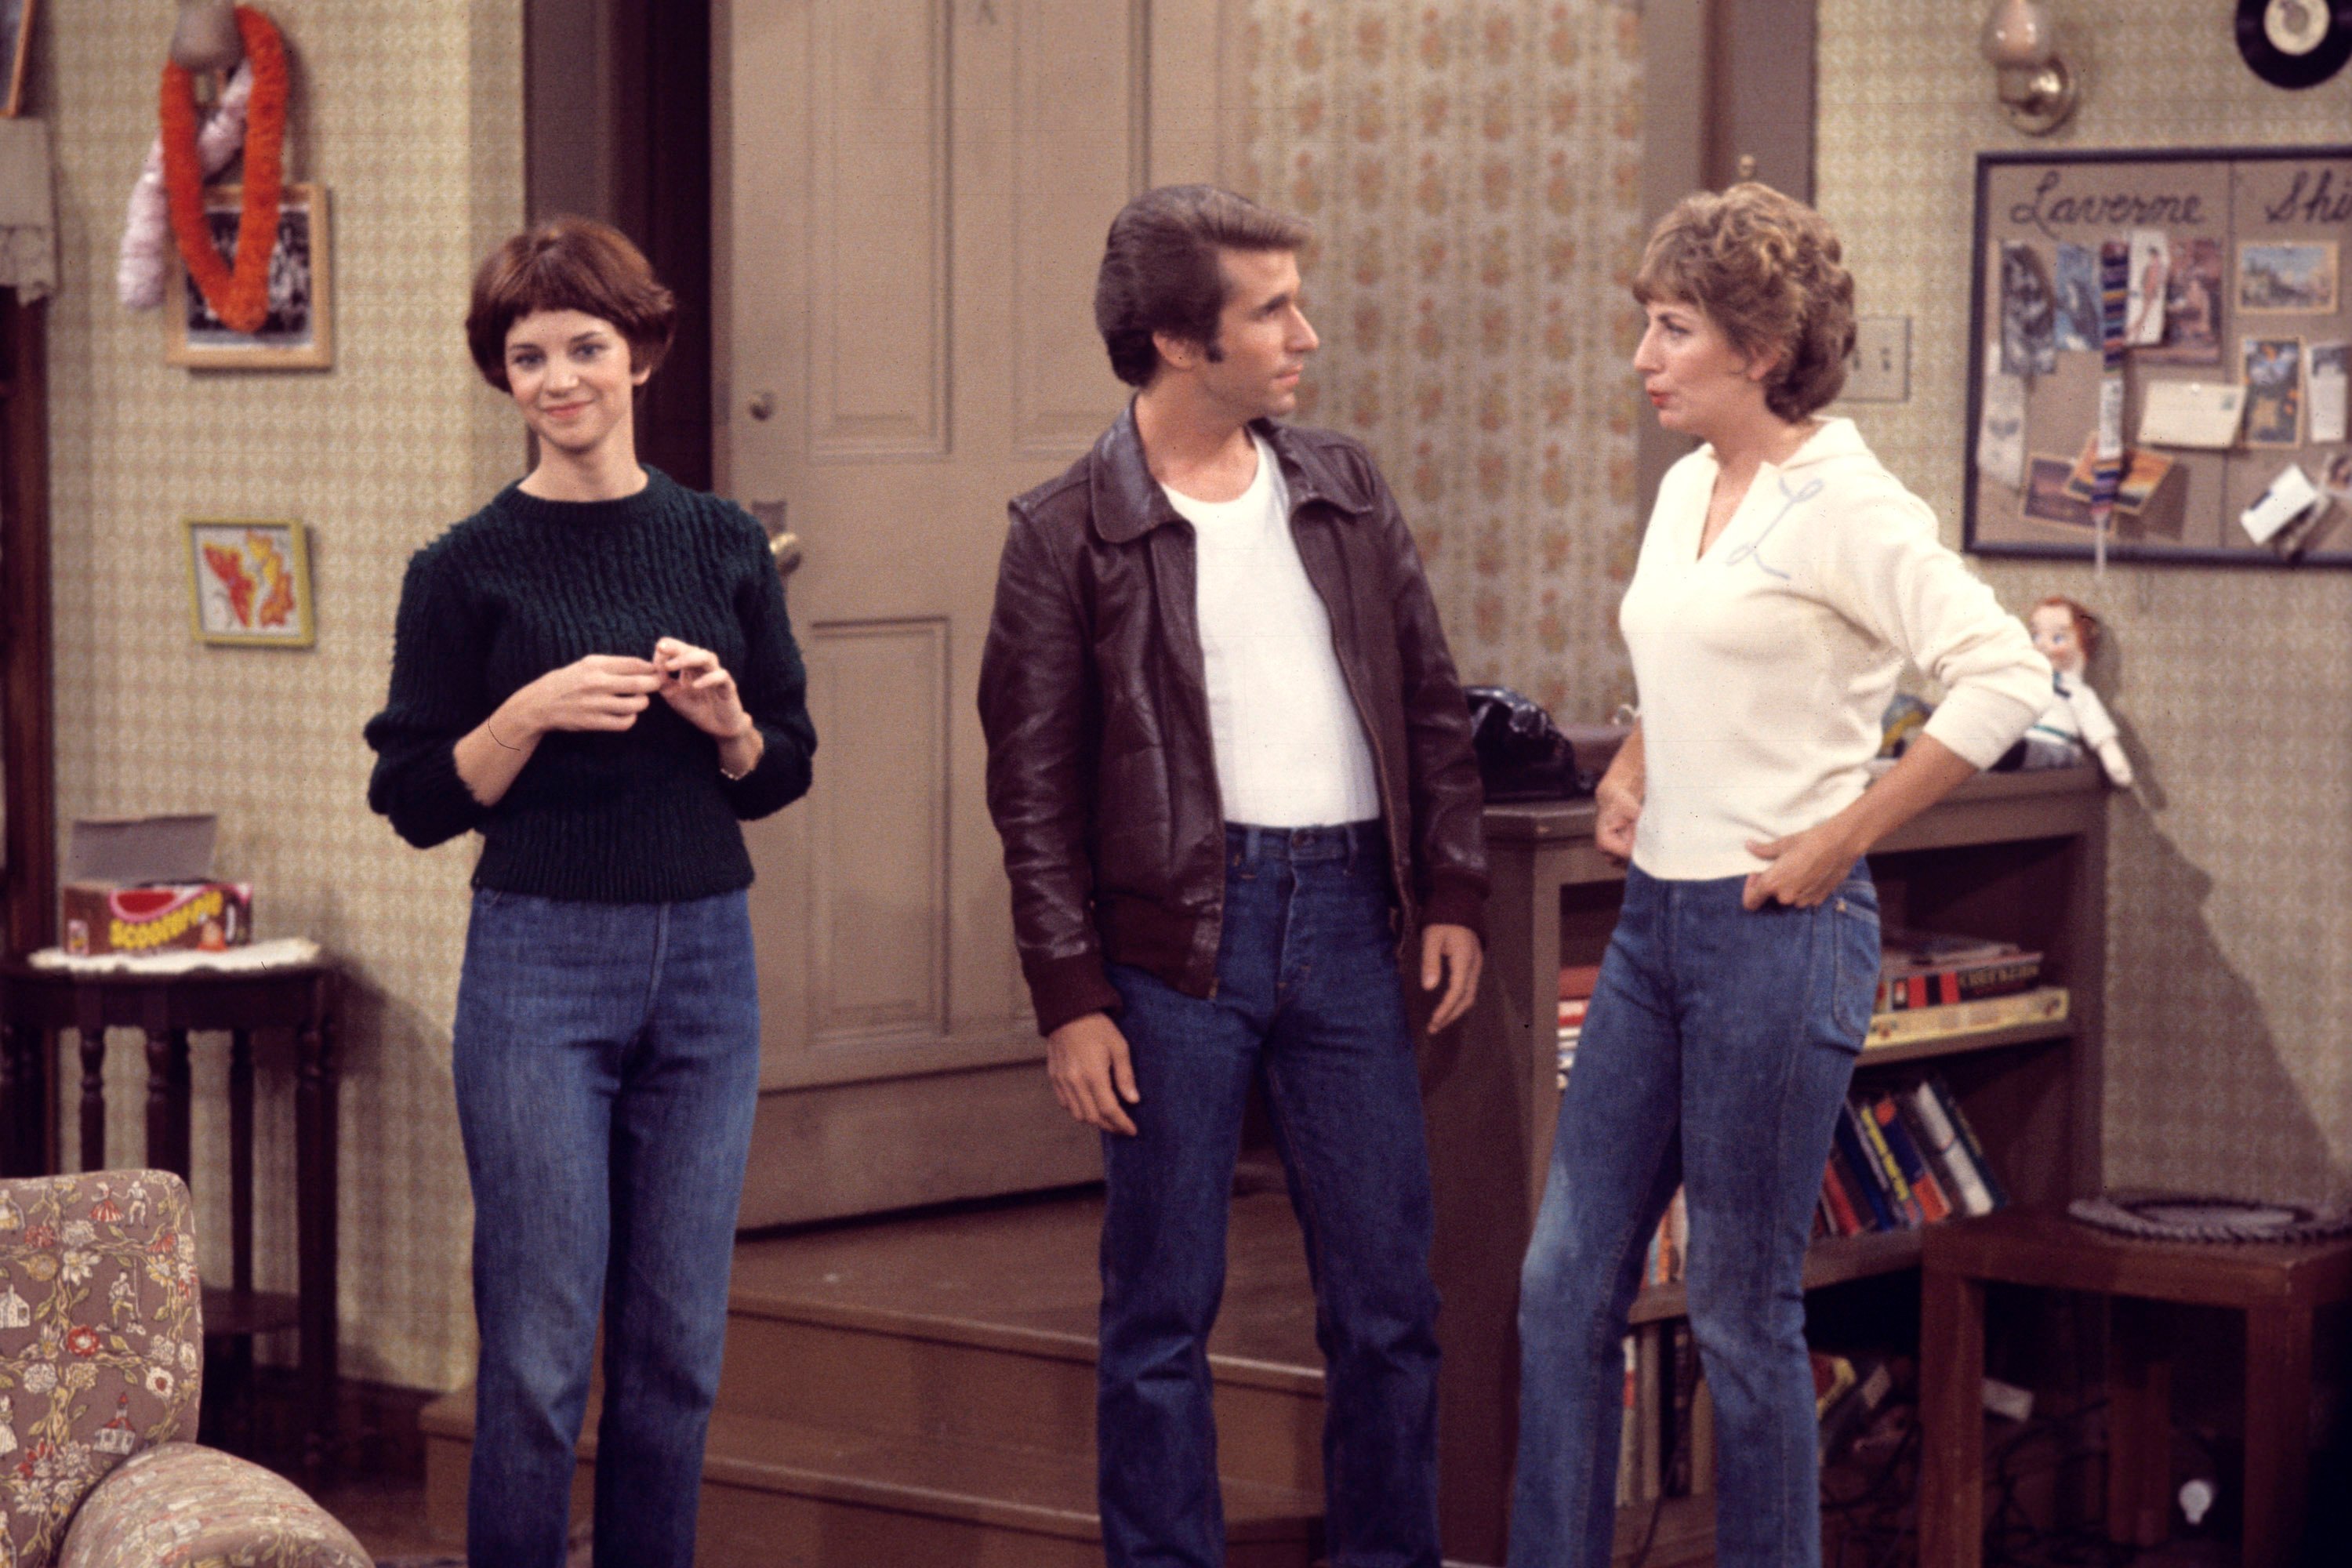 'Laverne & Shirley stars Shirley (Cindy Williams) and Laverne (Penny Marshall) babysit for Fonzie's (Henry Winkler from 'Happy Days') godson